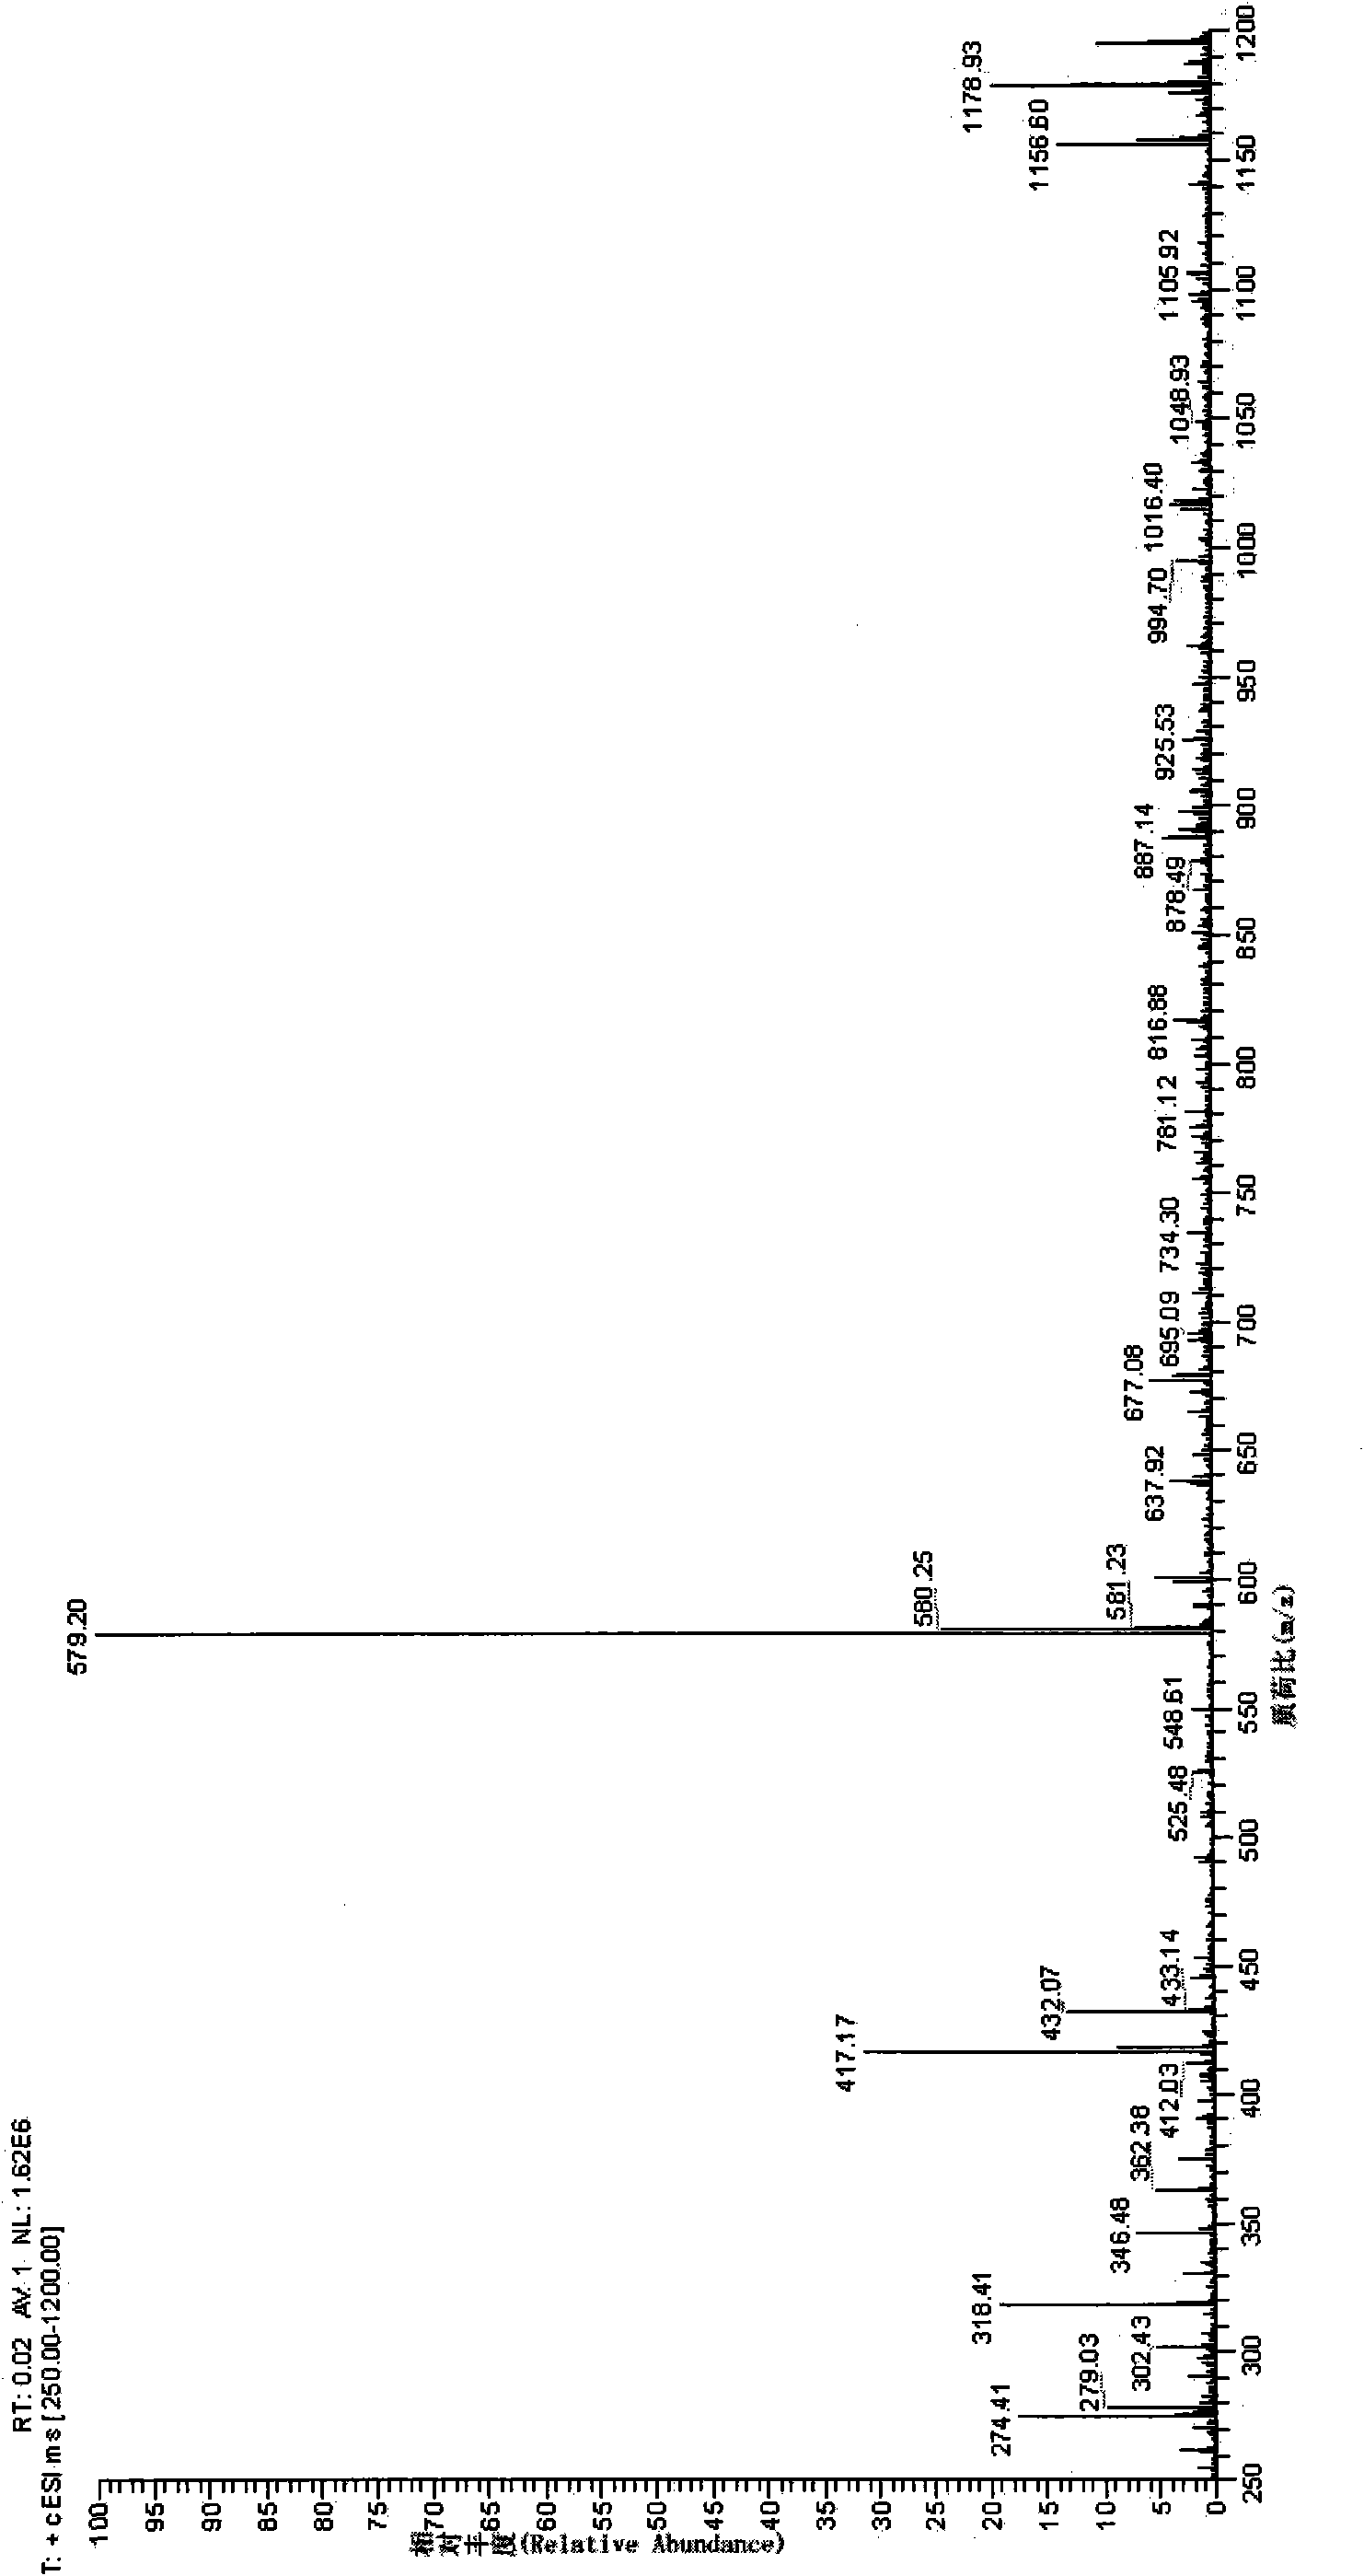 Method for modifying flavonoid glycoside compounds with galactosy transferase